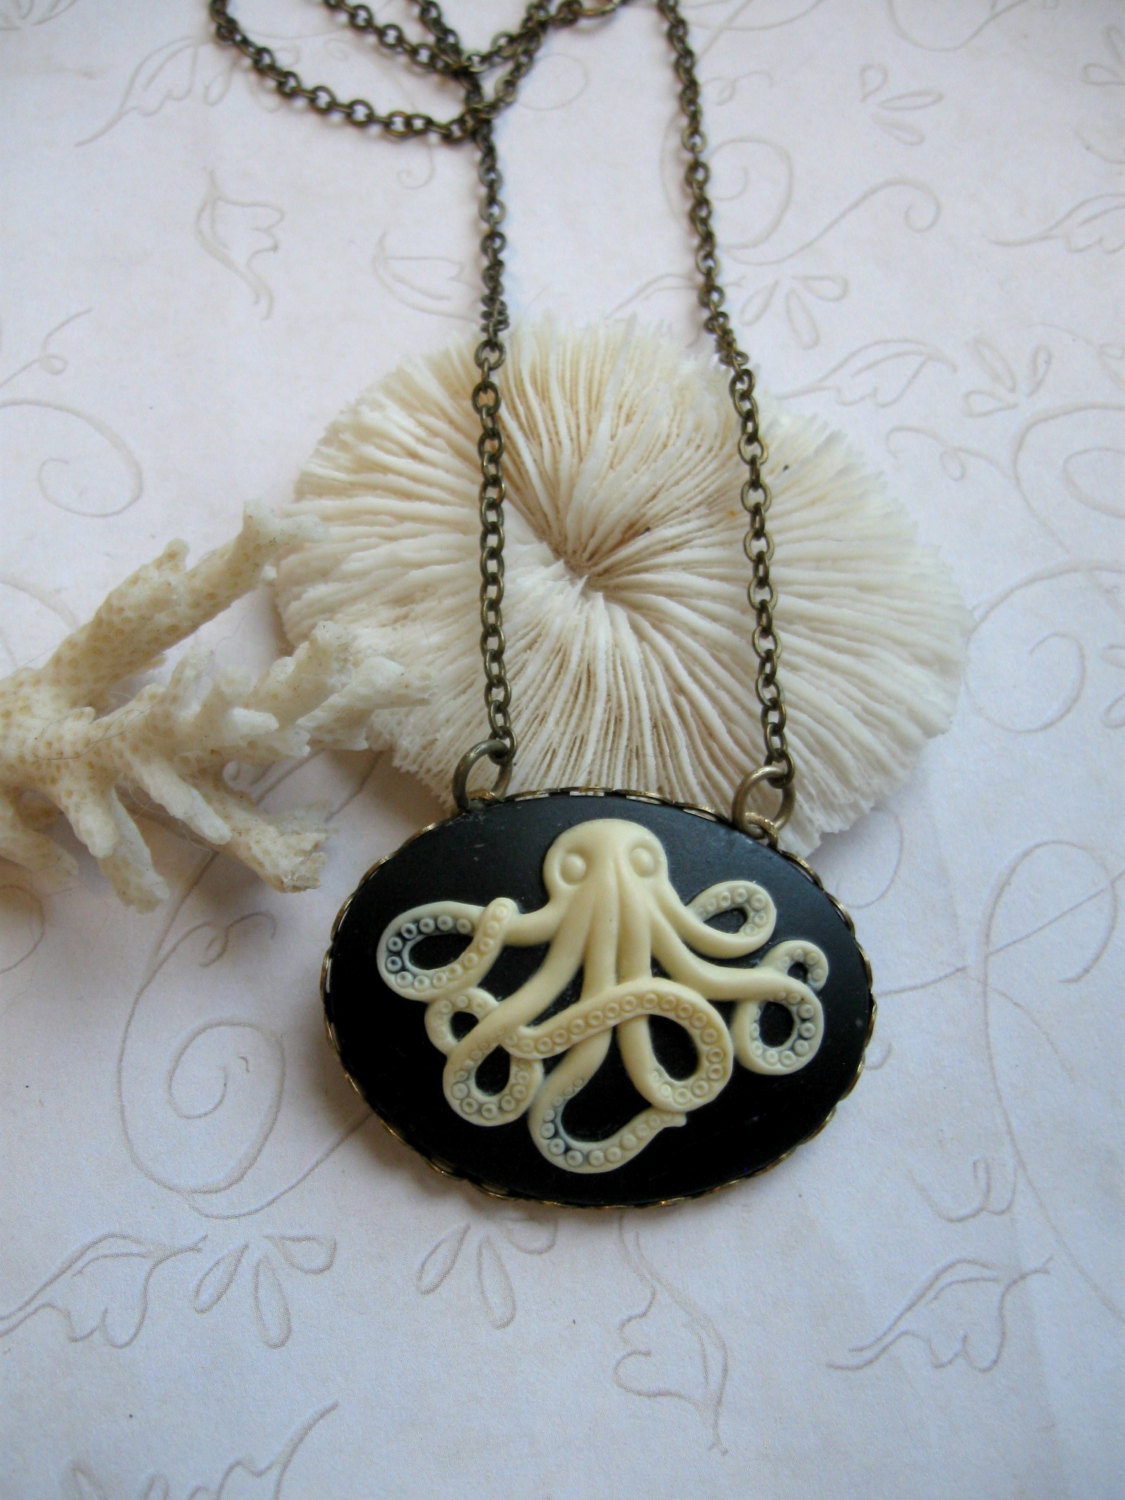 Octopus necklace, black cameo, brass chain